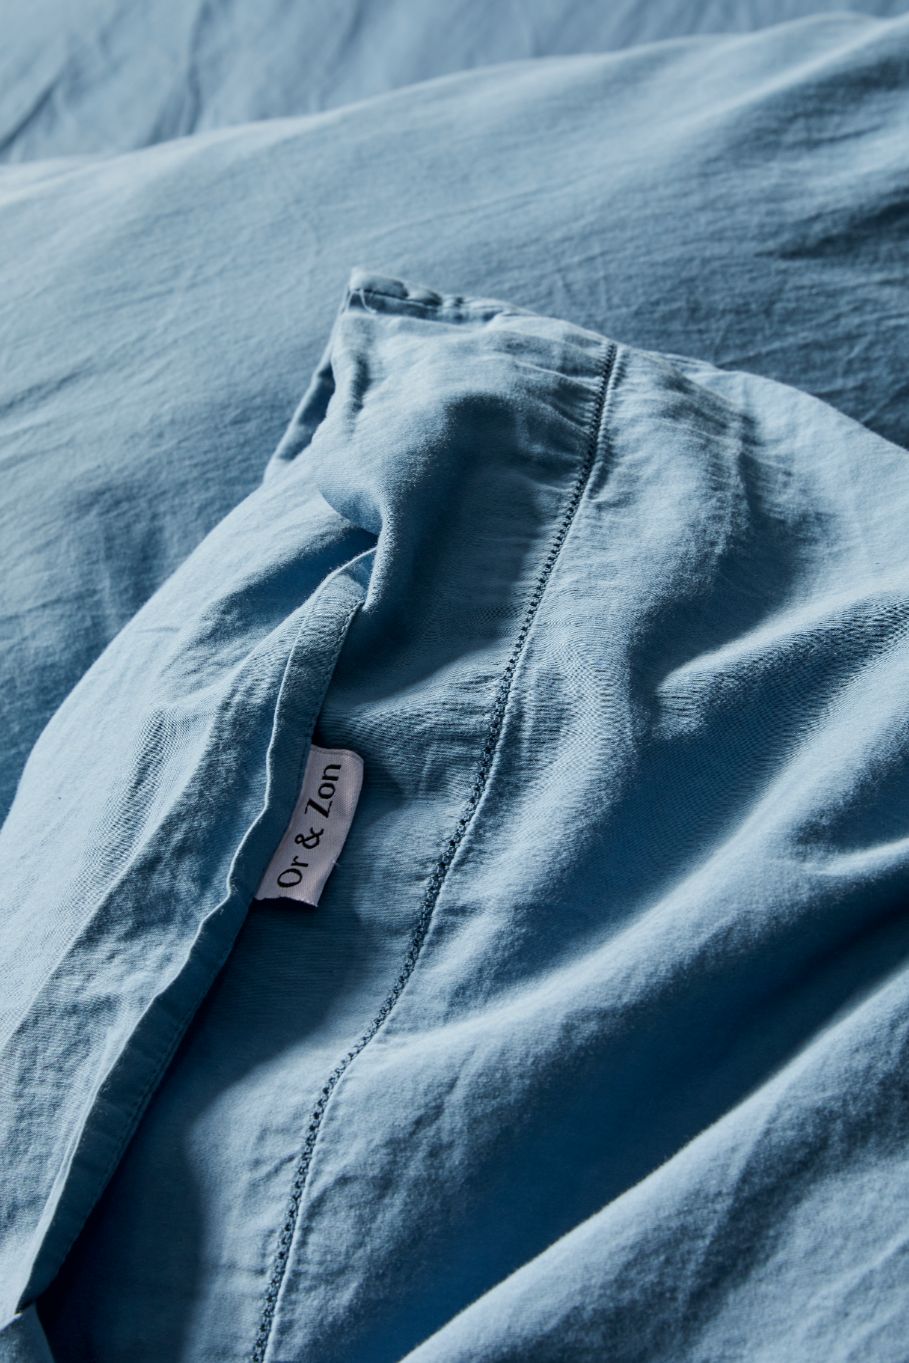 Aegean blue sateen bed sheets close-up